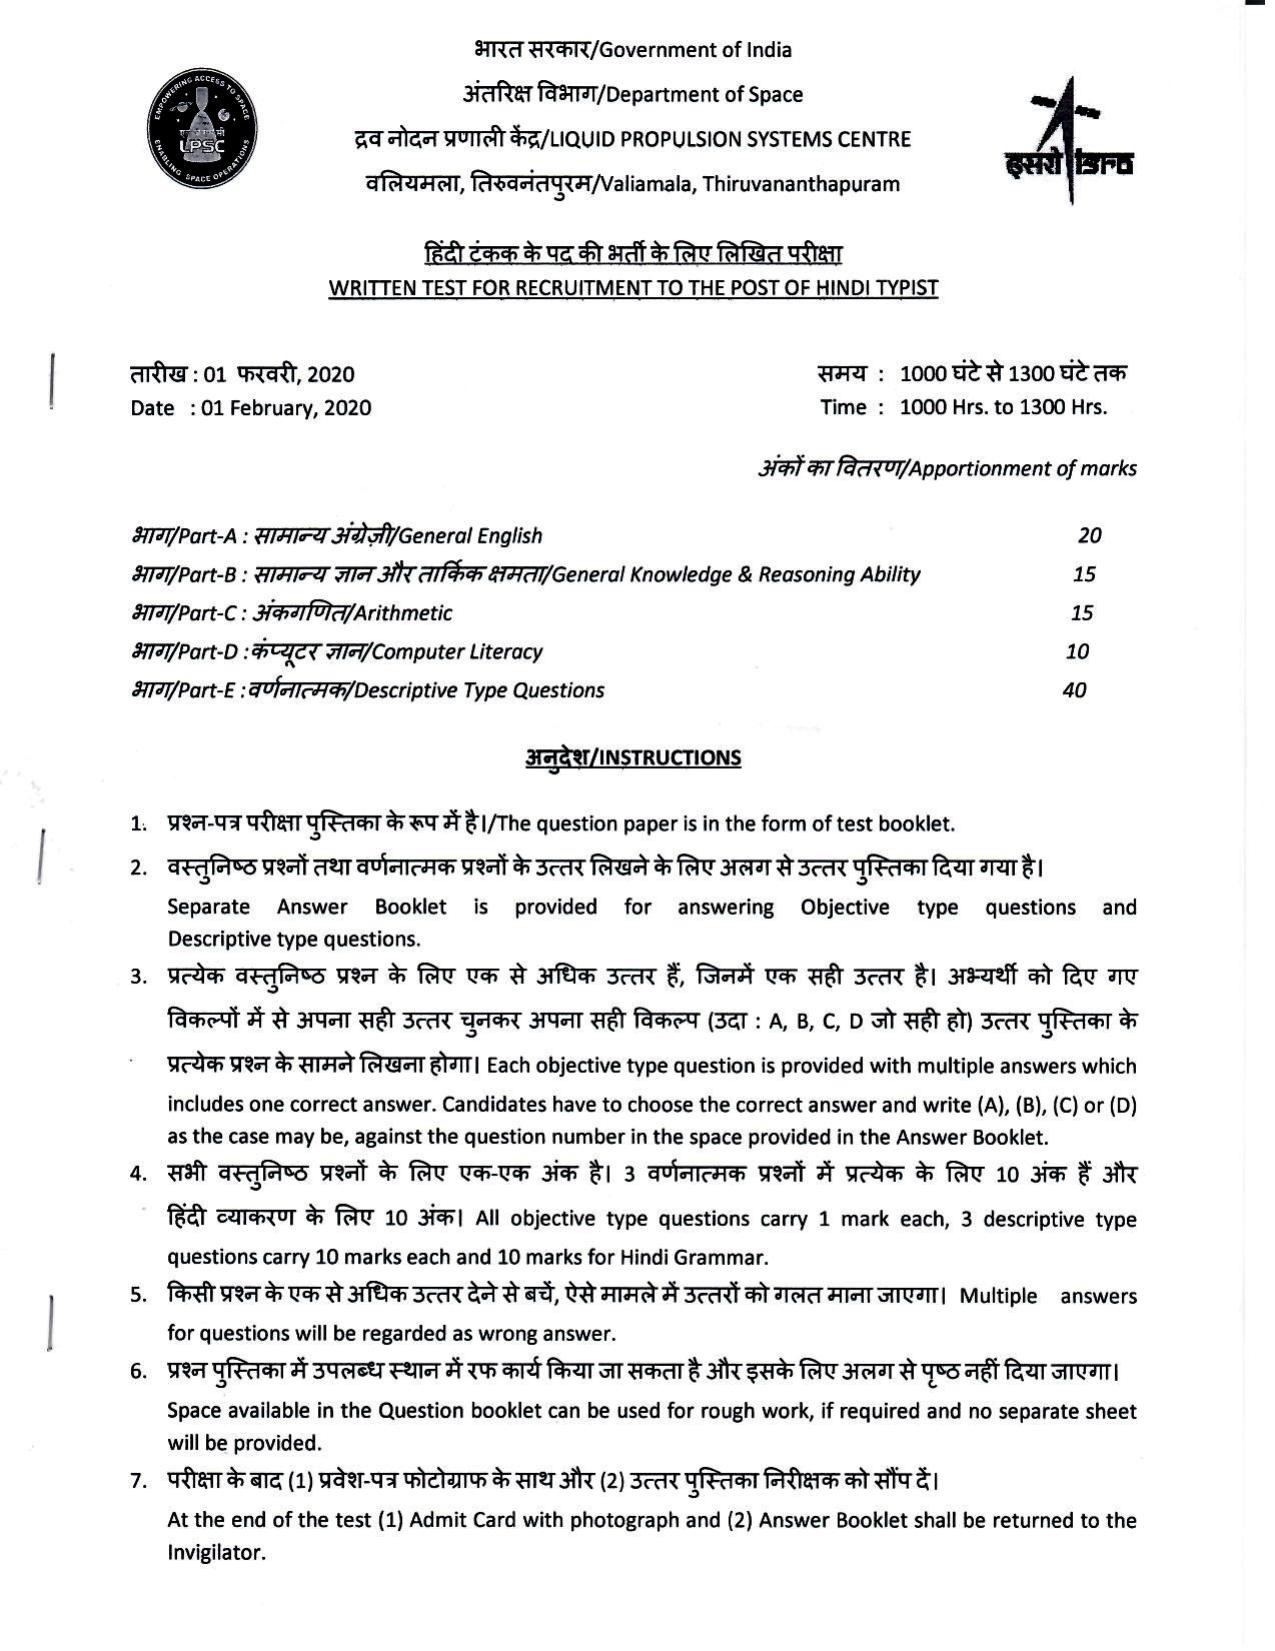 LPSC Hindi Typist 2020 Question Paper - Page 1